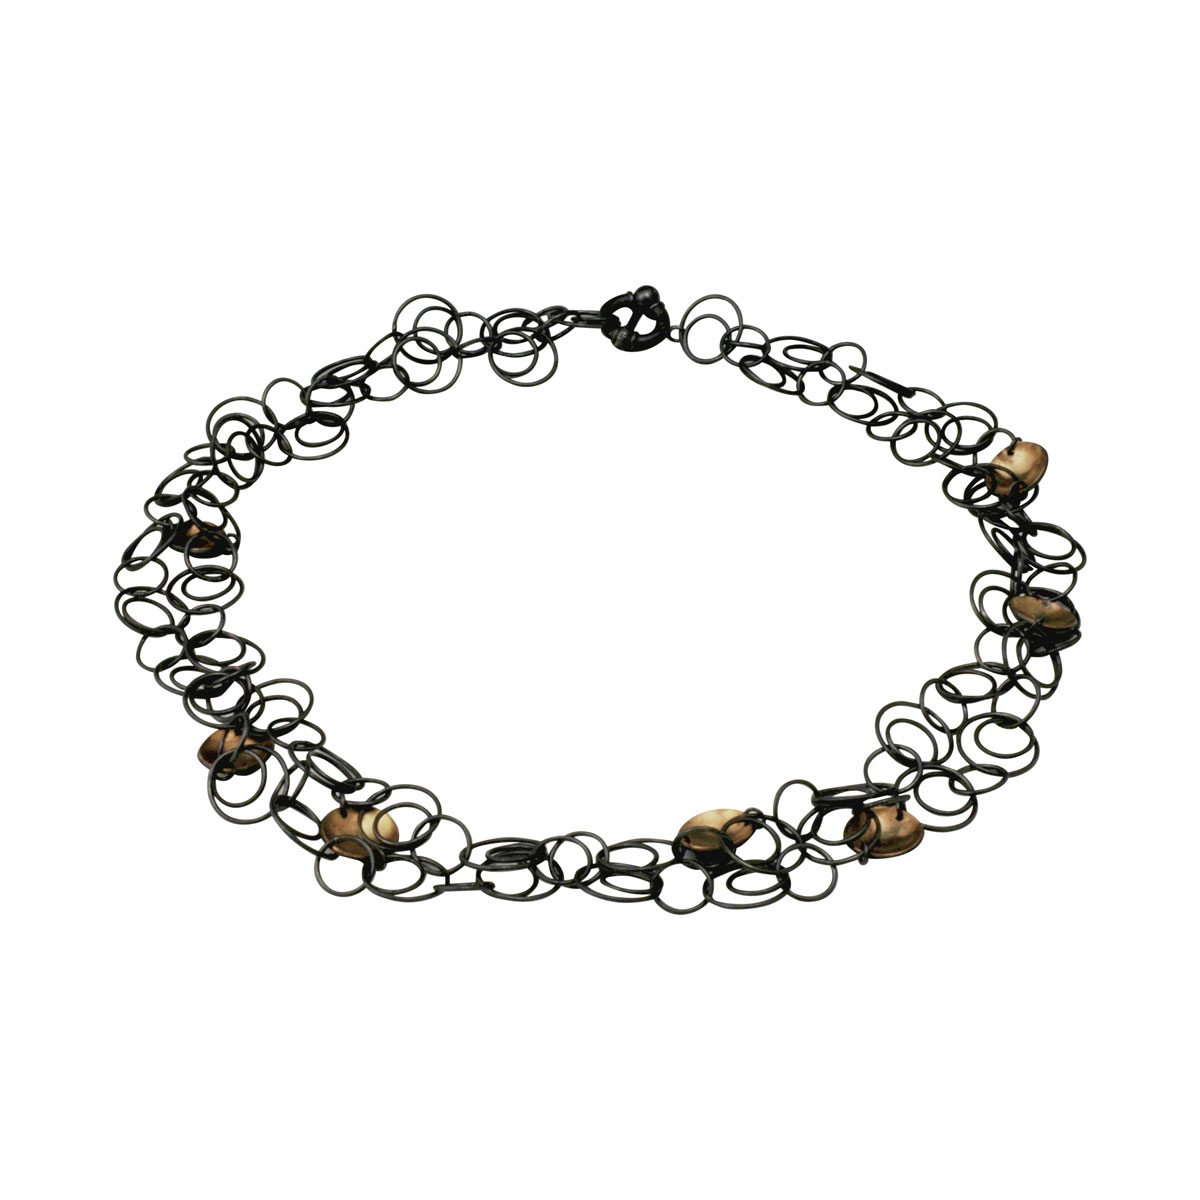 Oxidised silver orbital necklace with gold plated hemispheres